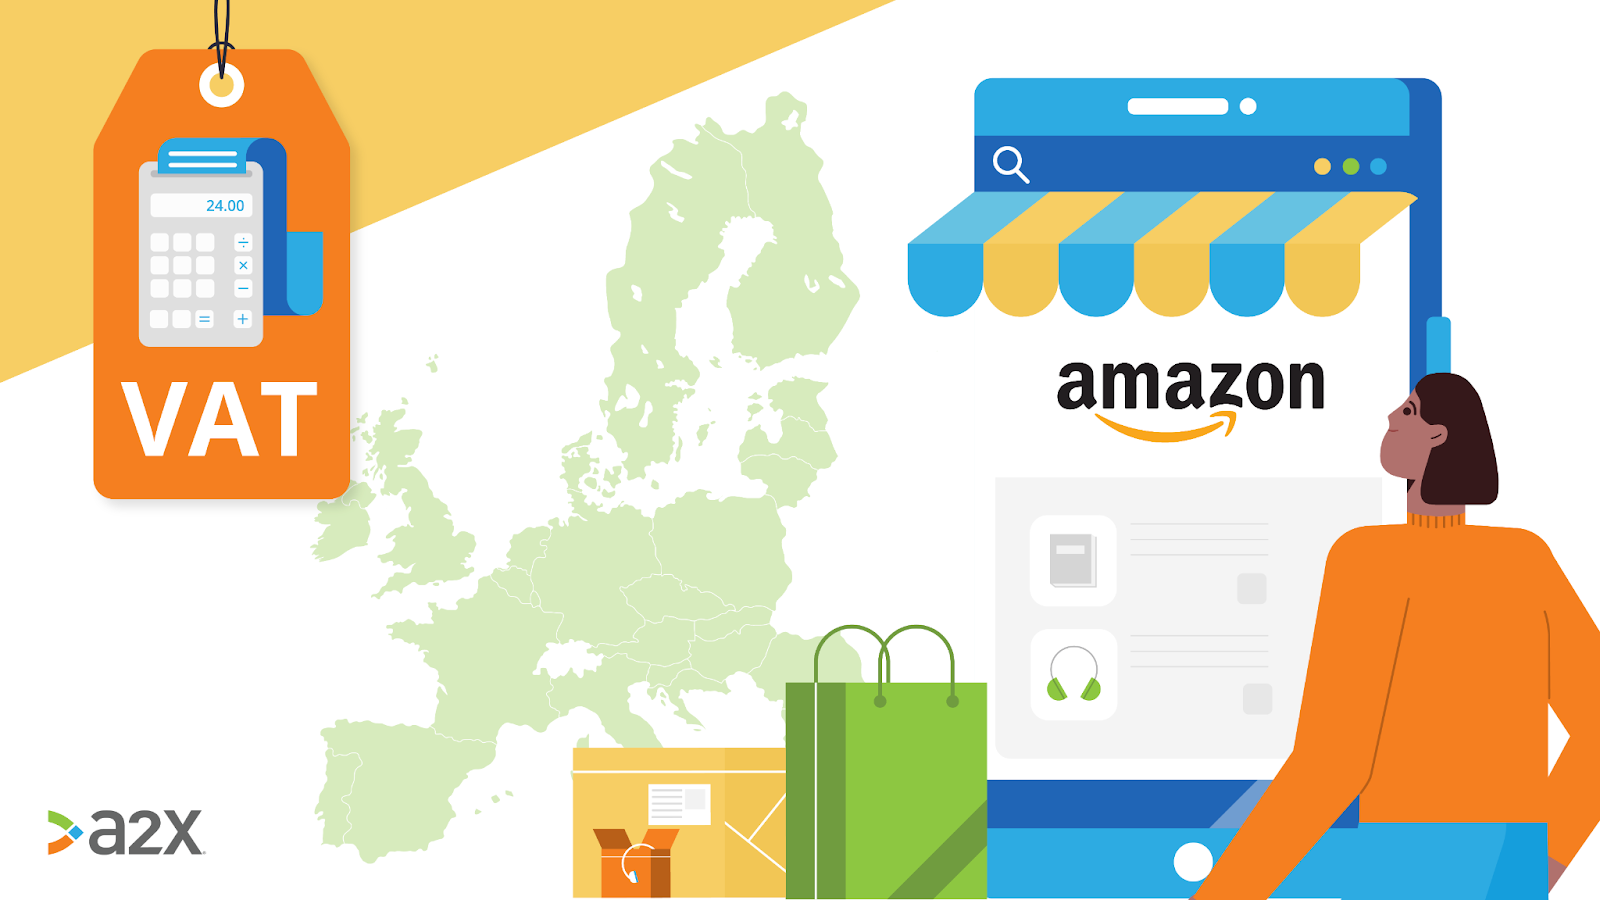 A2X can help with VAT for Amazon users